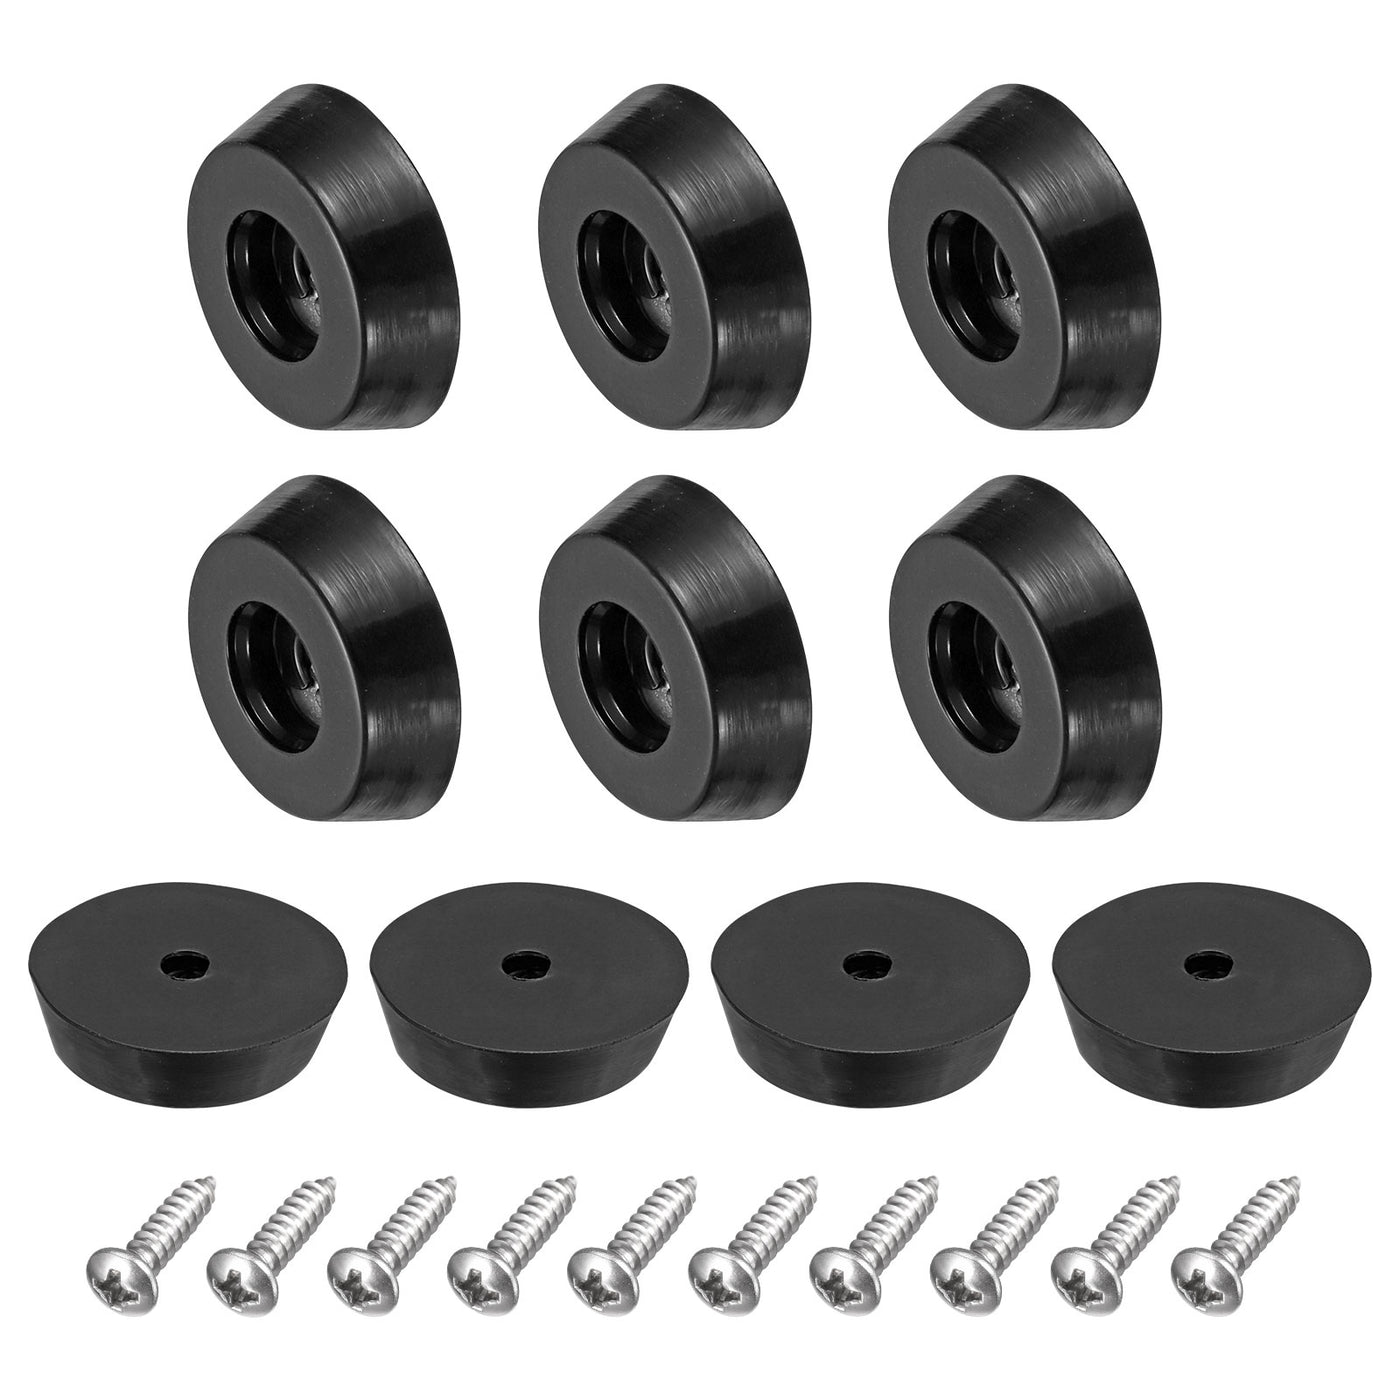 uxcell Uxcell 18Pcs Rubber Bumper Feet, 0.2" H x 0.71" W Round Pads with Stainless Steel Washer and Screws for Furniture, Appliances, Electronics